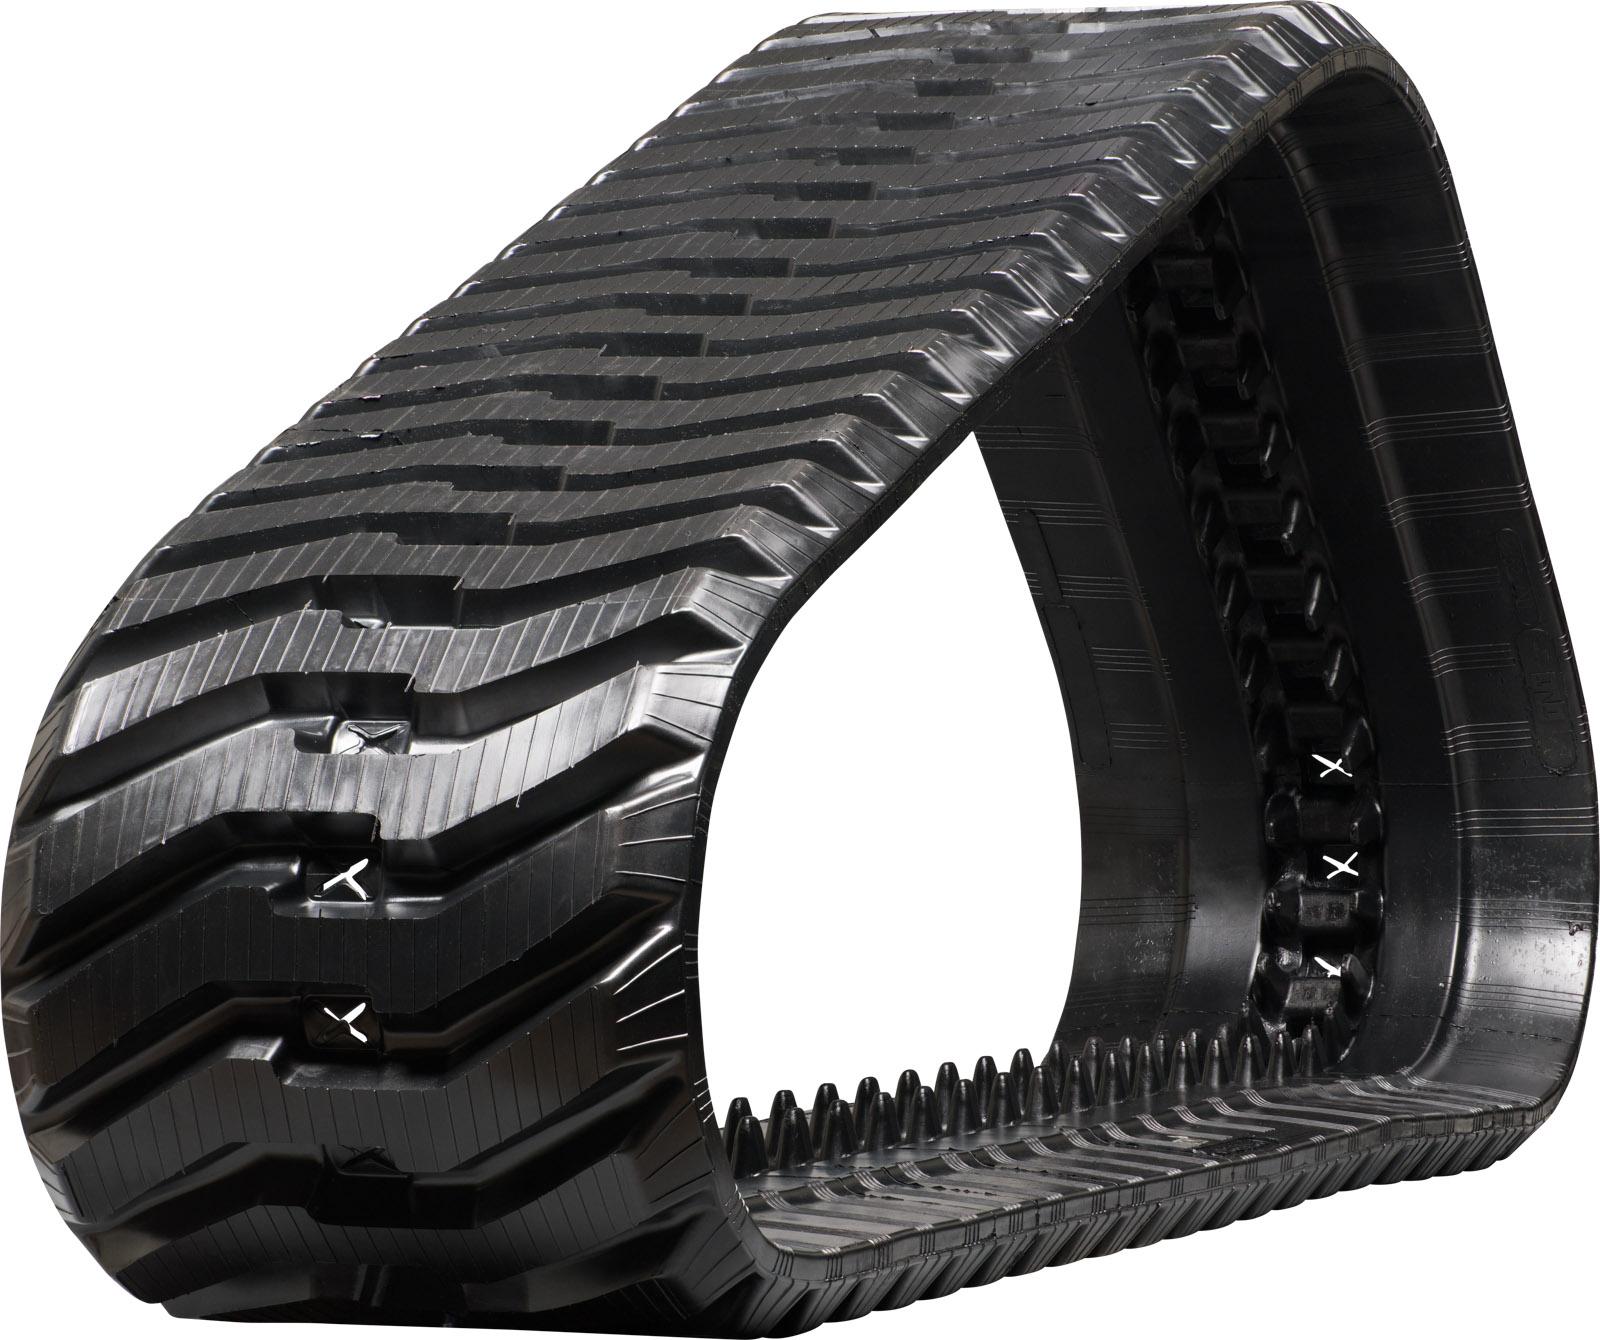 set of 2 18" extreme duty bd pattern rubber track (450x86lx56)